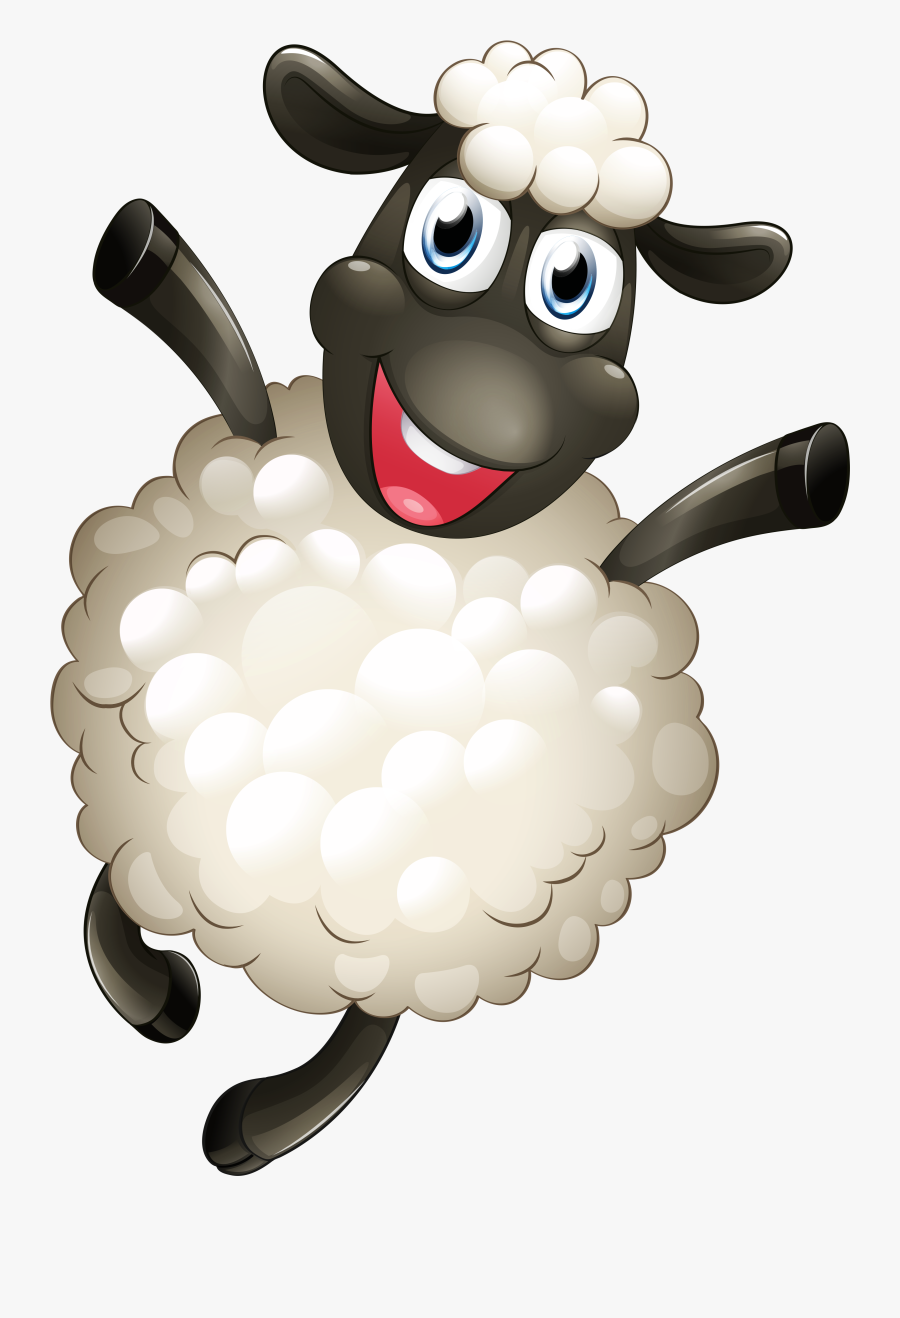 Sheep Sticker Cartoon Free Download Image Clipart - Sheep Png, Transparent Clipart